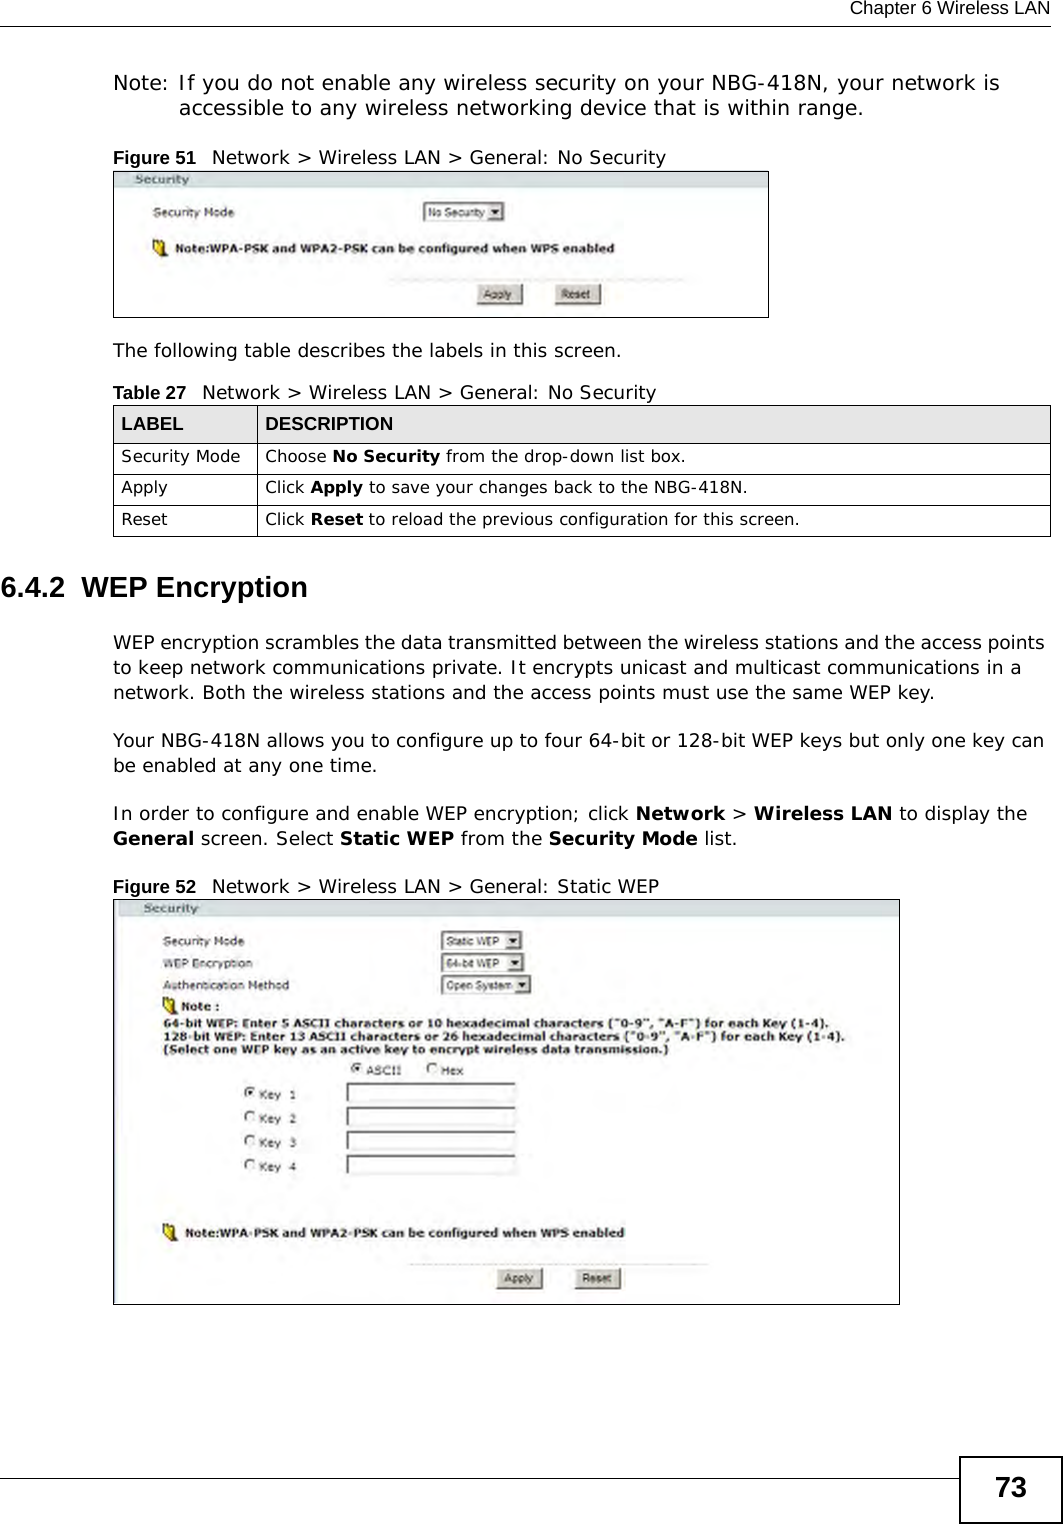  Chapter 6 Wireless LAN73Note: If you do not enable any wireless security on your NBG-418N, your network is accessible to any wireless networking device that is within range.Figure 51   Network &gt; Wireless LAN &gt; General: No SecurityThe following table describes the labels in this screen.6.4.2  WEP EncryptionWEP encryption scrambles the data transmitted between the wireless stations and the access points to keep network communications private. It encrypts unicast and multicast communications in a network. Both the wireless stations and the access points must use the same WEP key.Your NBG-418N allows you to configure up to four 64-bit or 128-bit WEP keys but only one key can be enabled at any one time.In order to configure and enable WEP encryption; click Network &gt; Wireless LAN to display the General screen. Select Static WEP from the Security Mode list.Figure 52   Network &gt; Wireless LAN &gt; General: Static WEPTable 27   Network &gt; Wireless LAN &gt; General: No SecurityLABEL DESCRIPTIONSecurity Mode Choose No Security from the drop-down list box.Apply Click Apply to save your changes back to the NBG-418N.Reset Click Reset to reload the previous configuration for this screen.